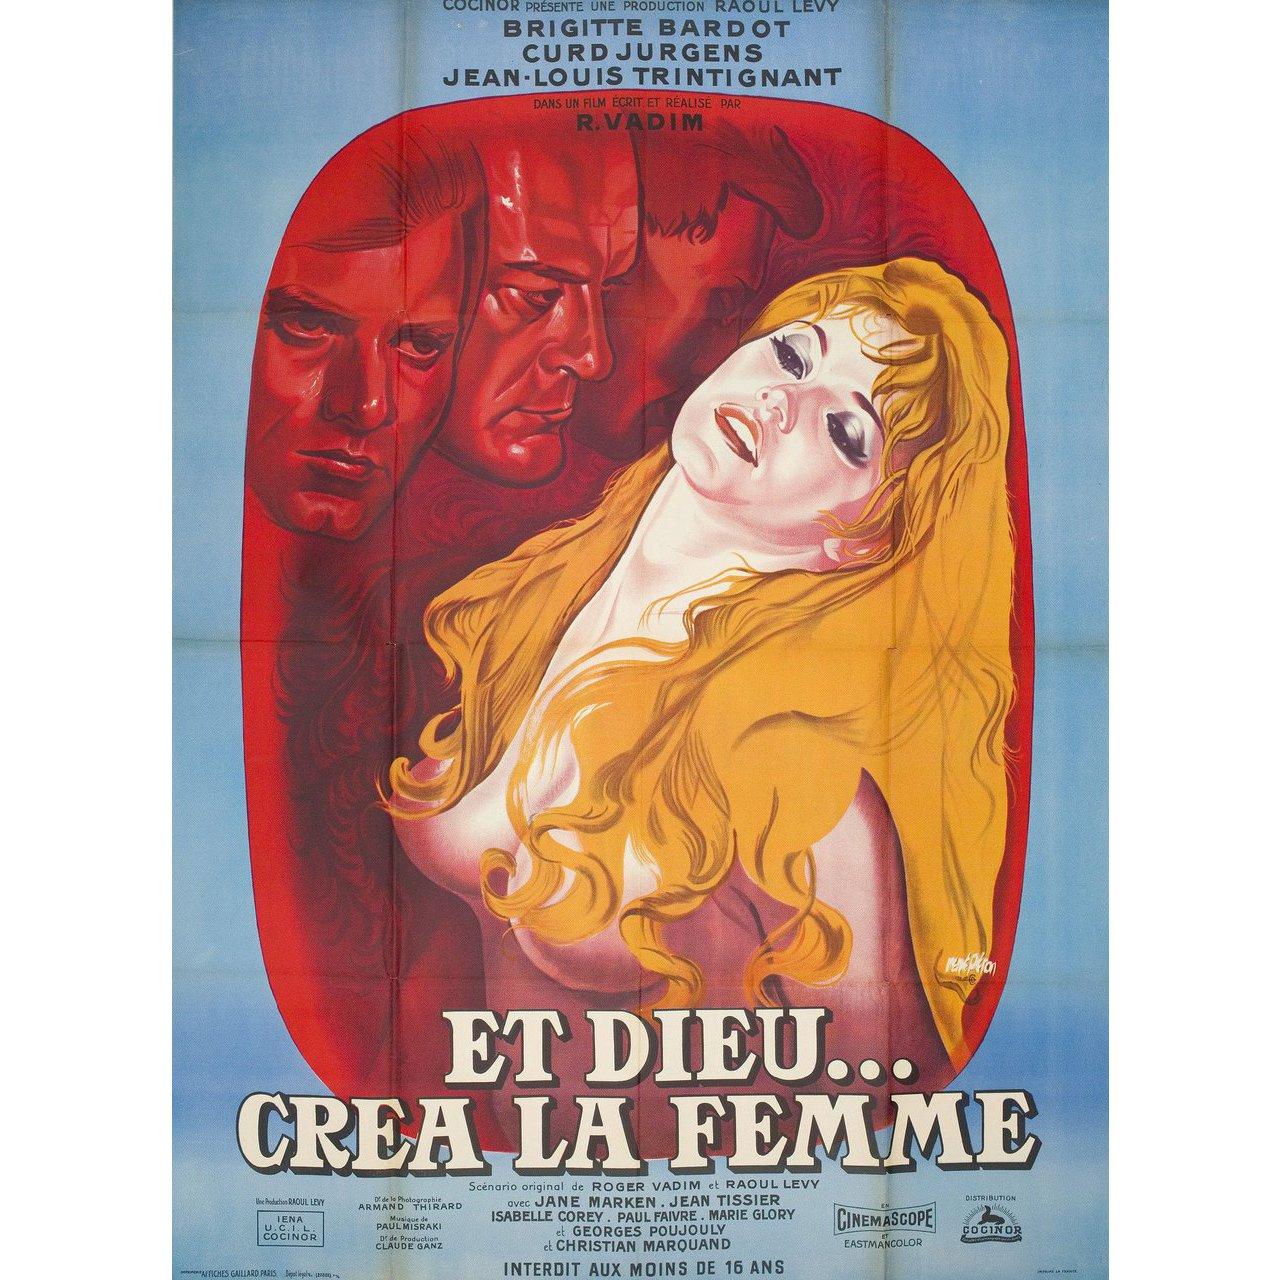 Original 1964 re-release French Grande poster by Rene Peron for. Very good-fine condition, folded. Many original posters were issued folded or were subsequently folded. Please note: the size is stated in inches and the actual size can vary by an